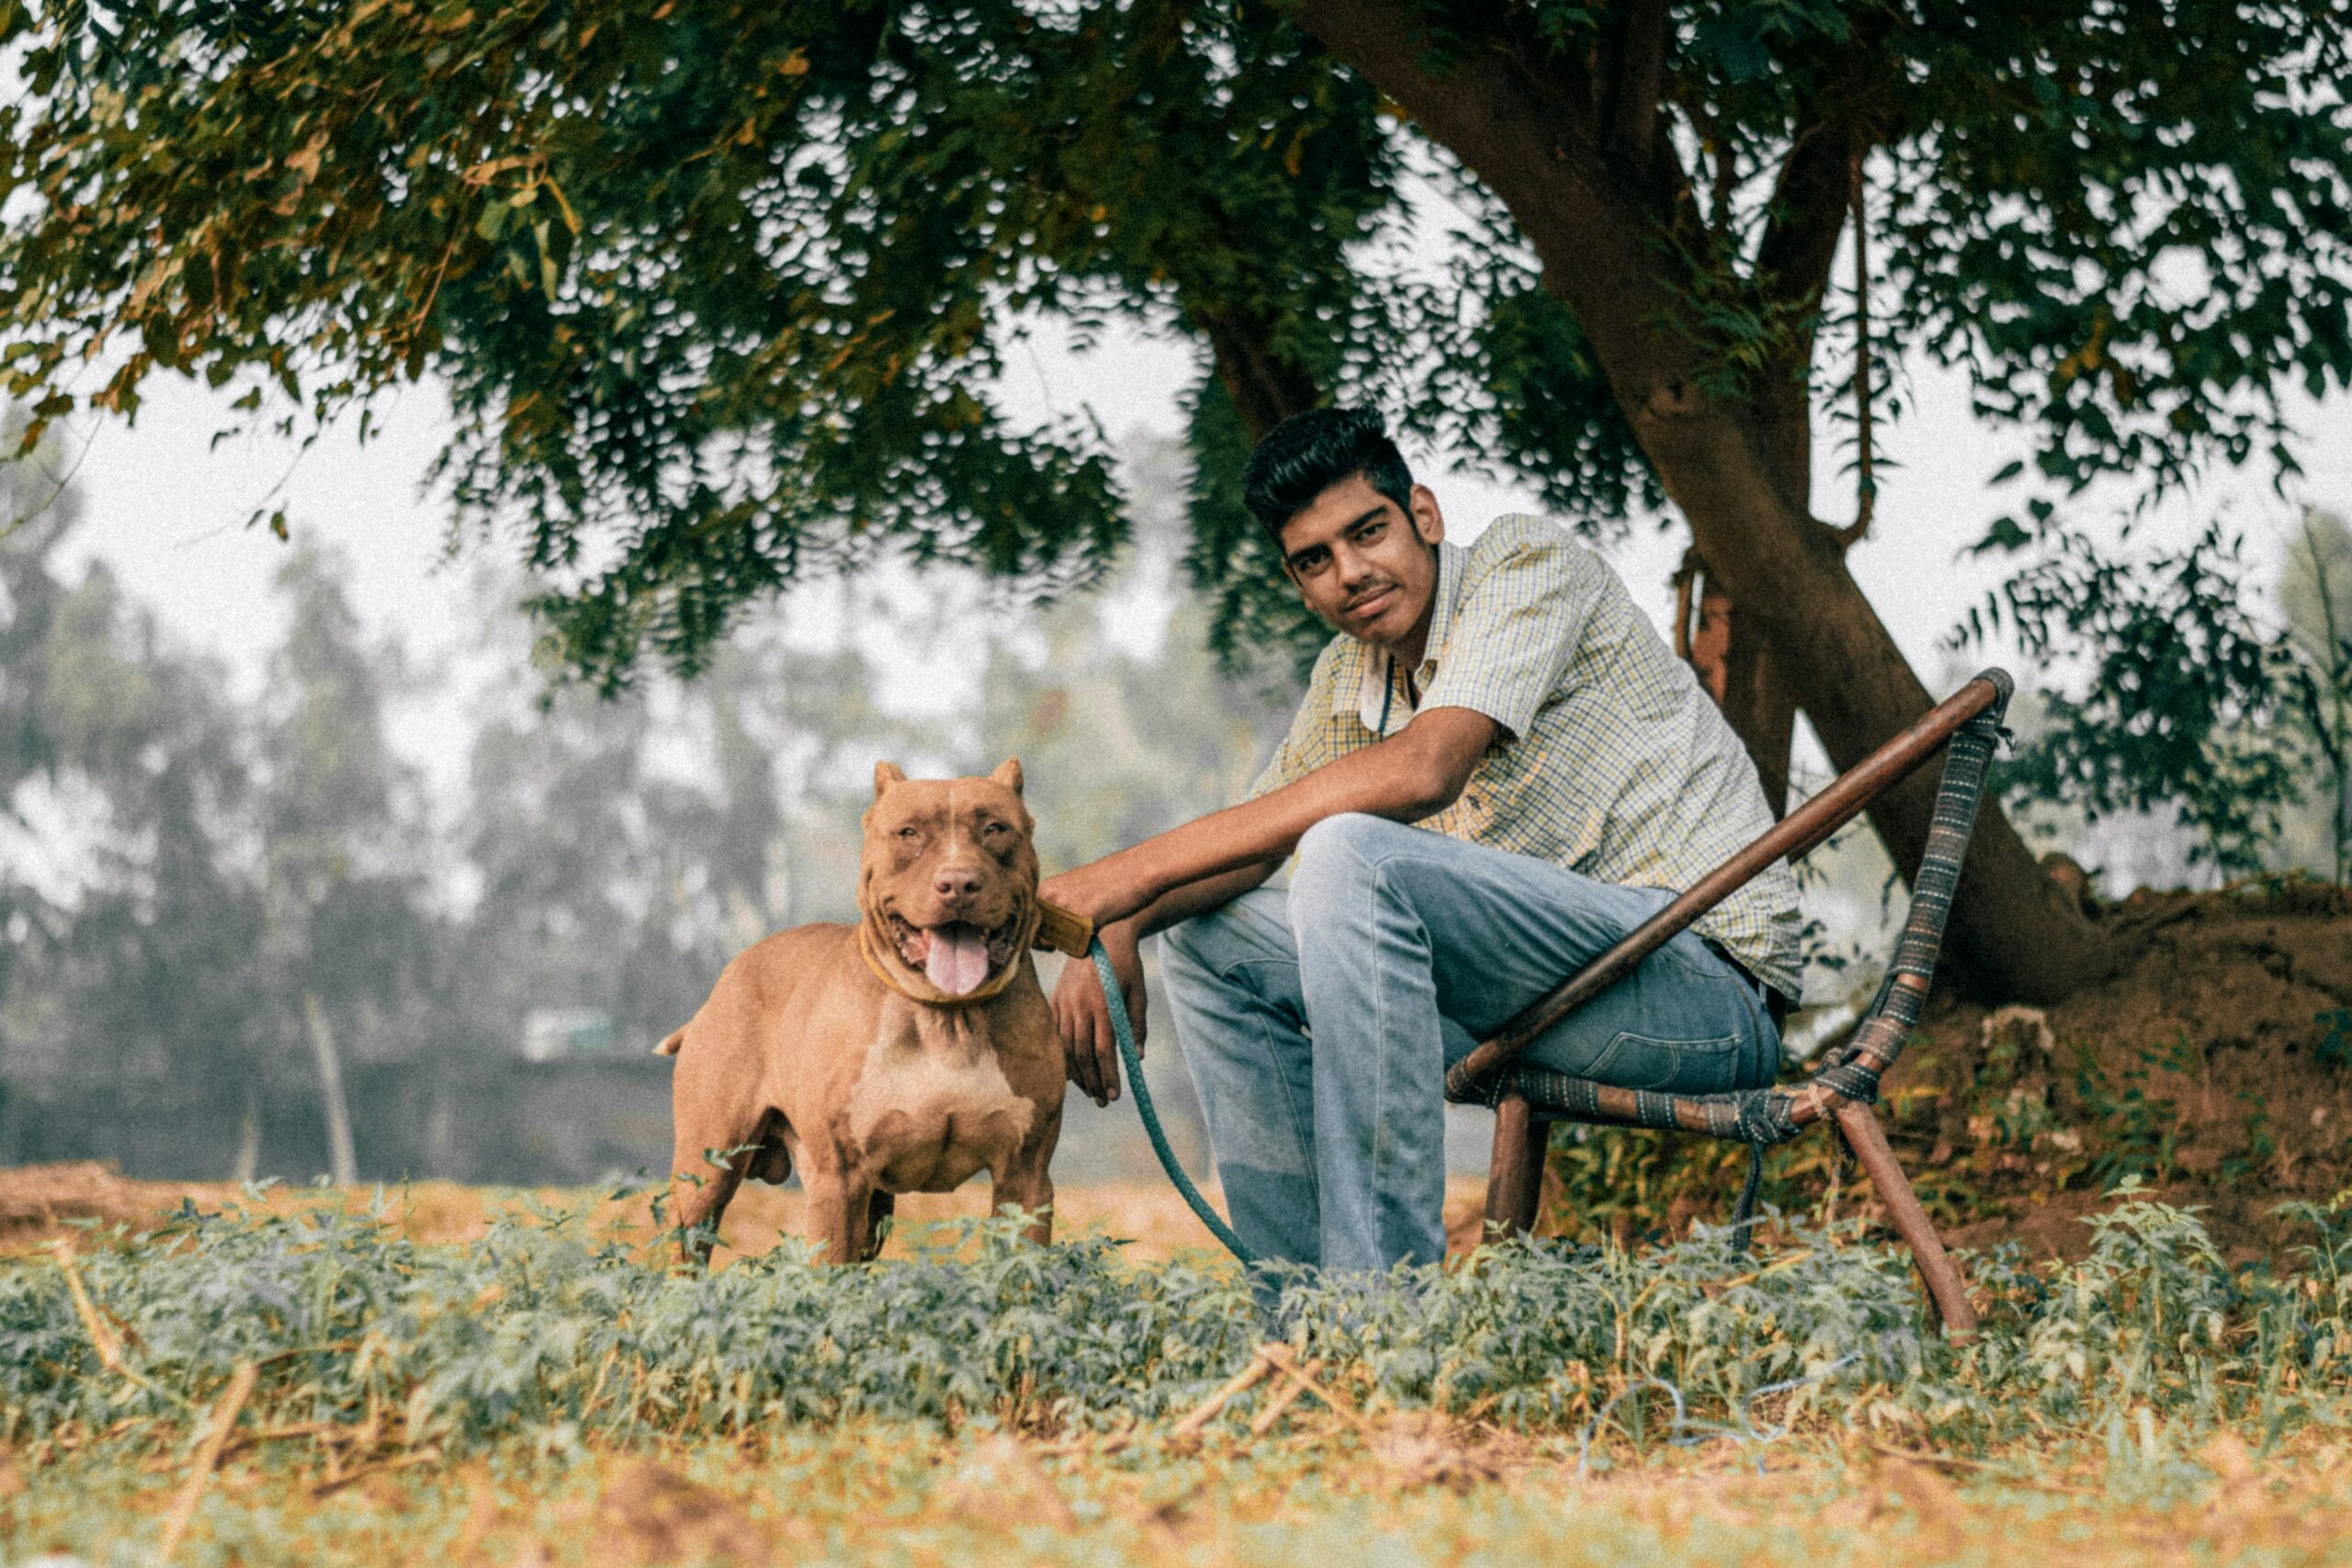 Pitbulls have this natural knack for understanding human emotions. They can tell when someone is feeling down, anxious, or upset, and they will often offer comfort by staying close, nuzzling gently, or just being there calmly. It makes them perfect companions for those dealing with emotional distress.